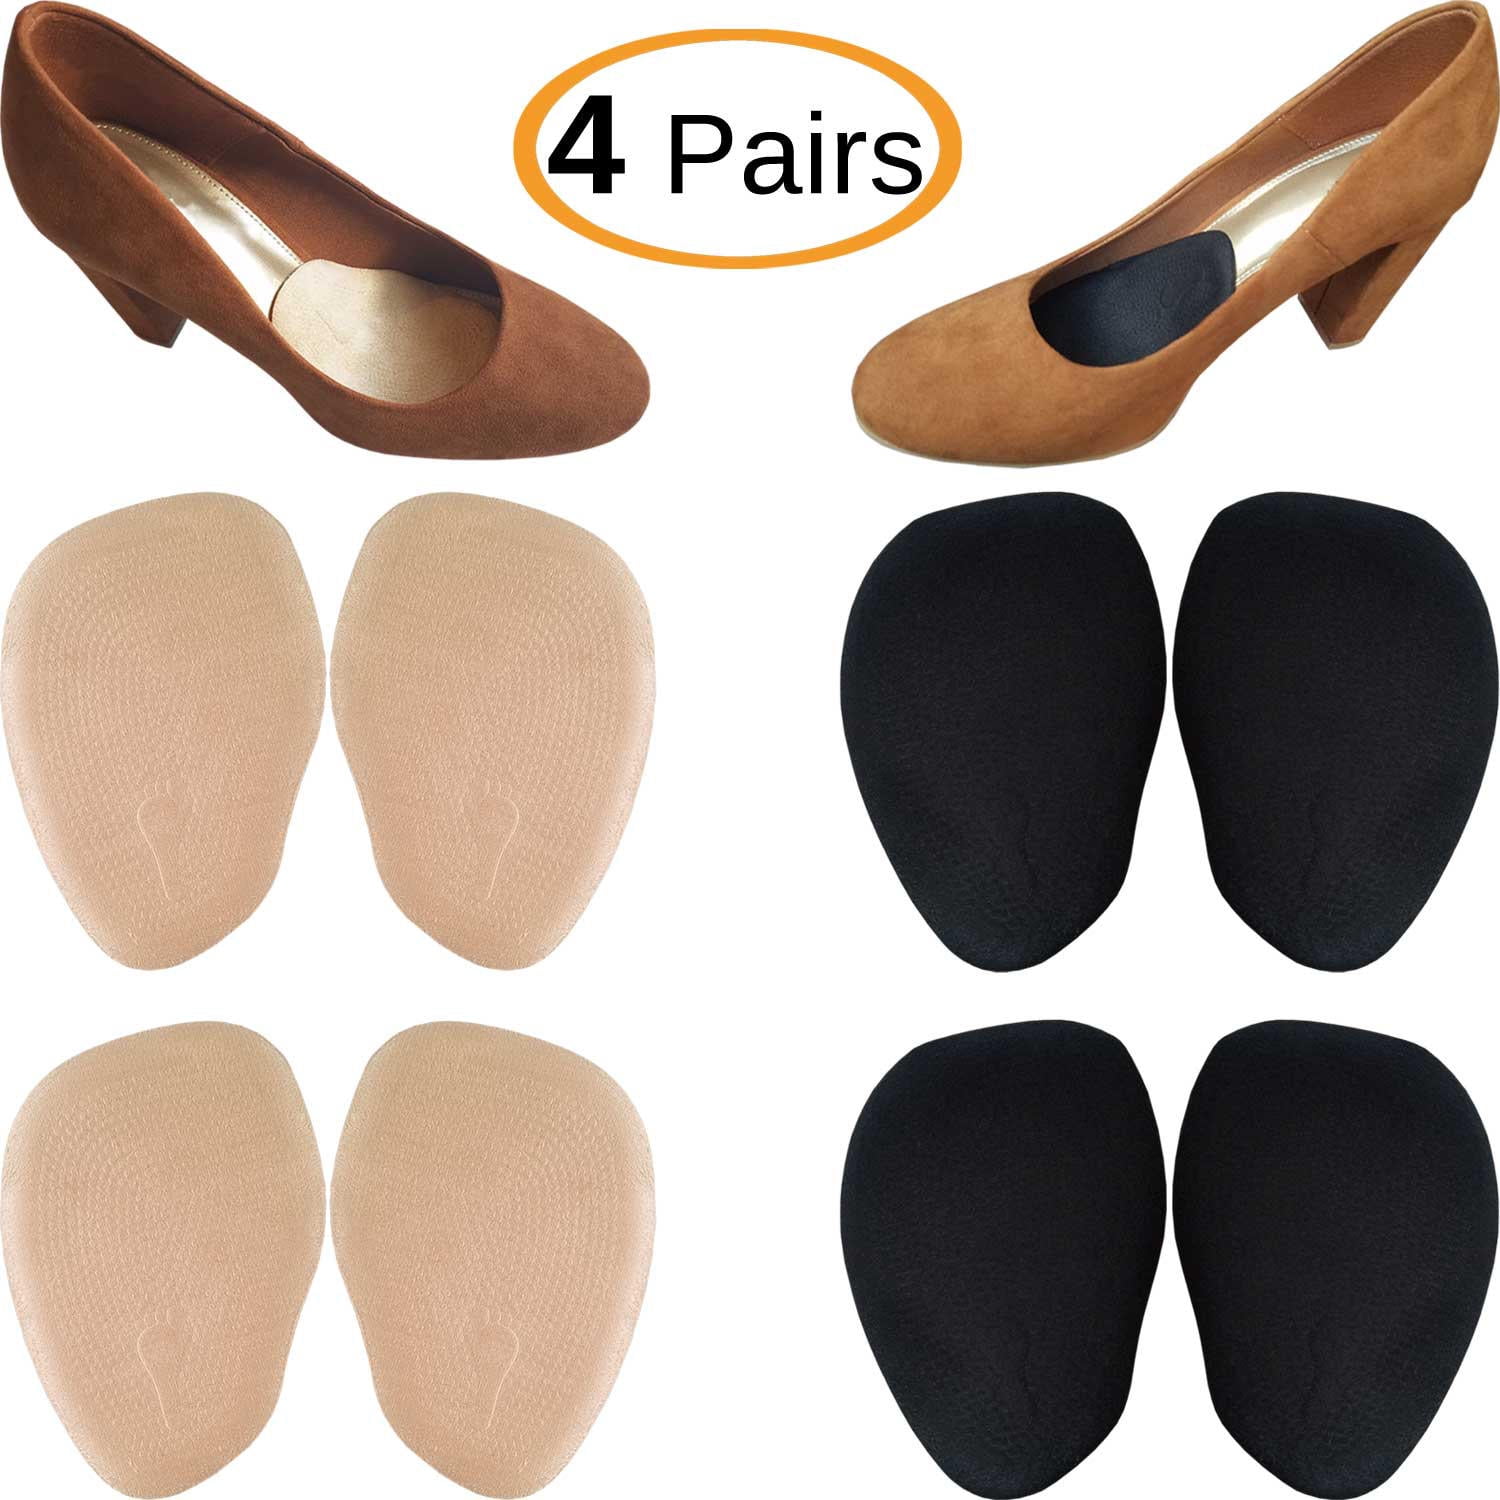 Chiroplax High Heel Cushion Inserts Pads 4 Pairs Suede Ball Of Foot